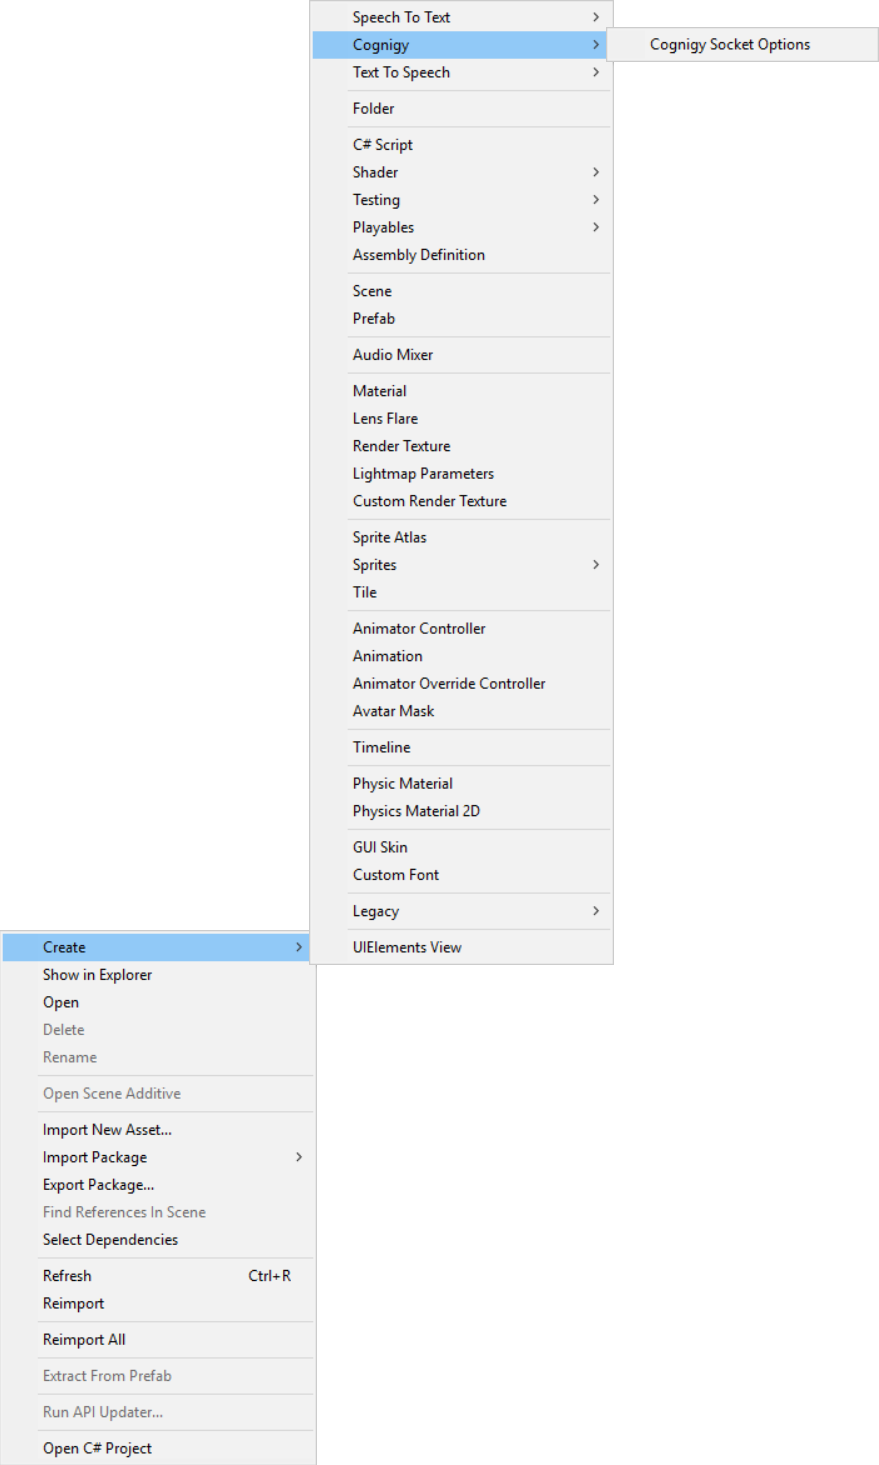 Figure 3: Socket Endpoint Options Context Menu in the Unity 3D Editor